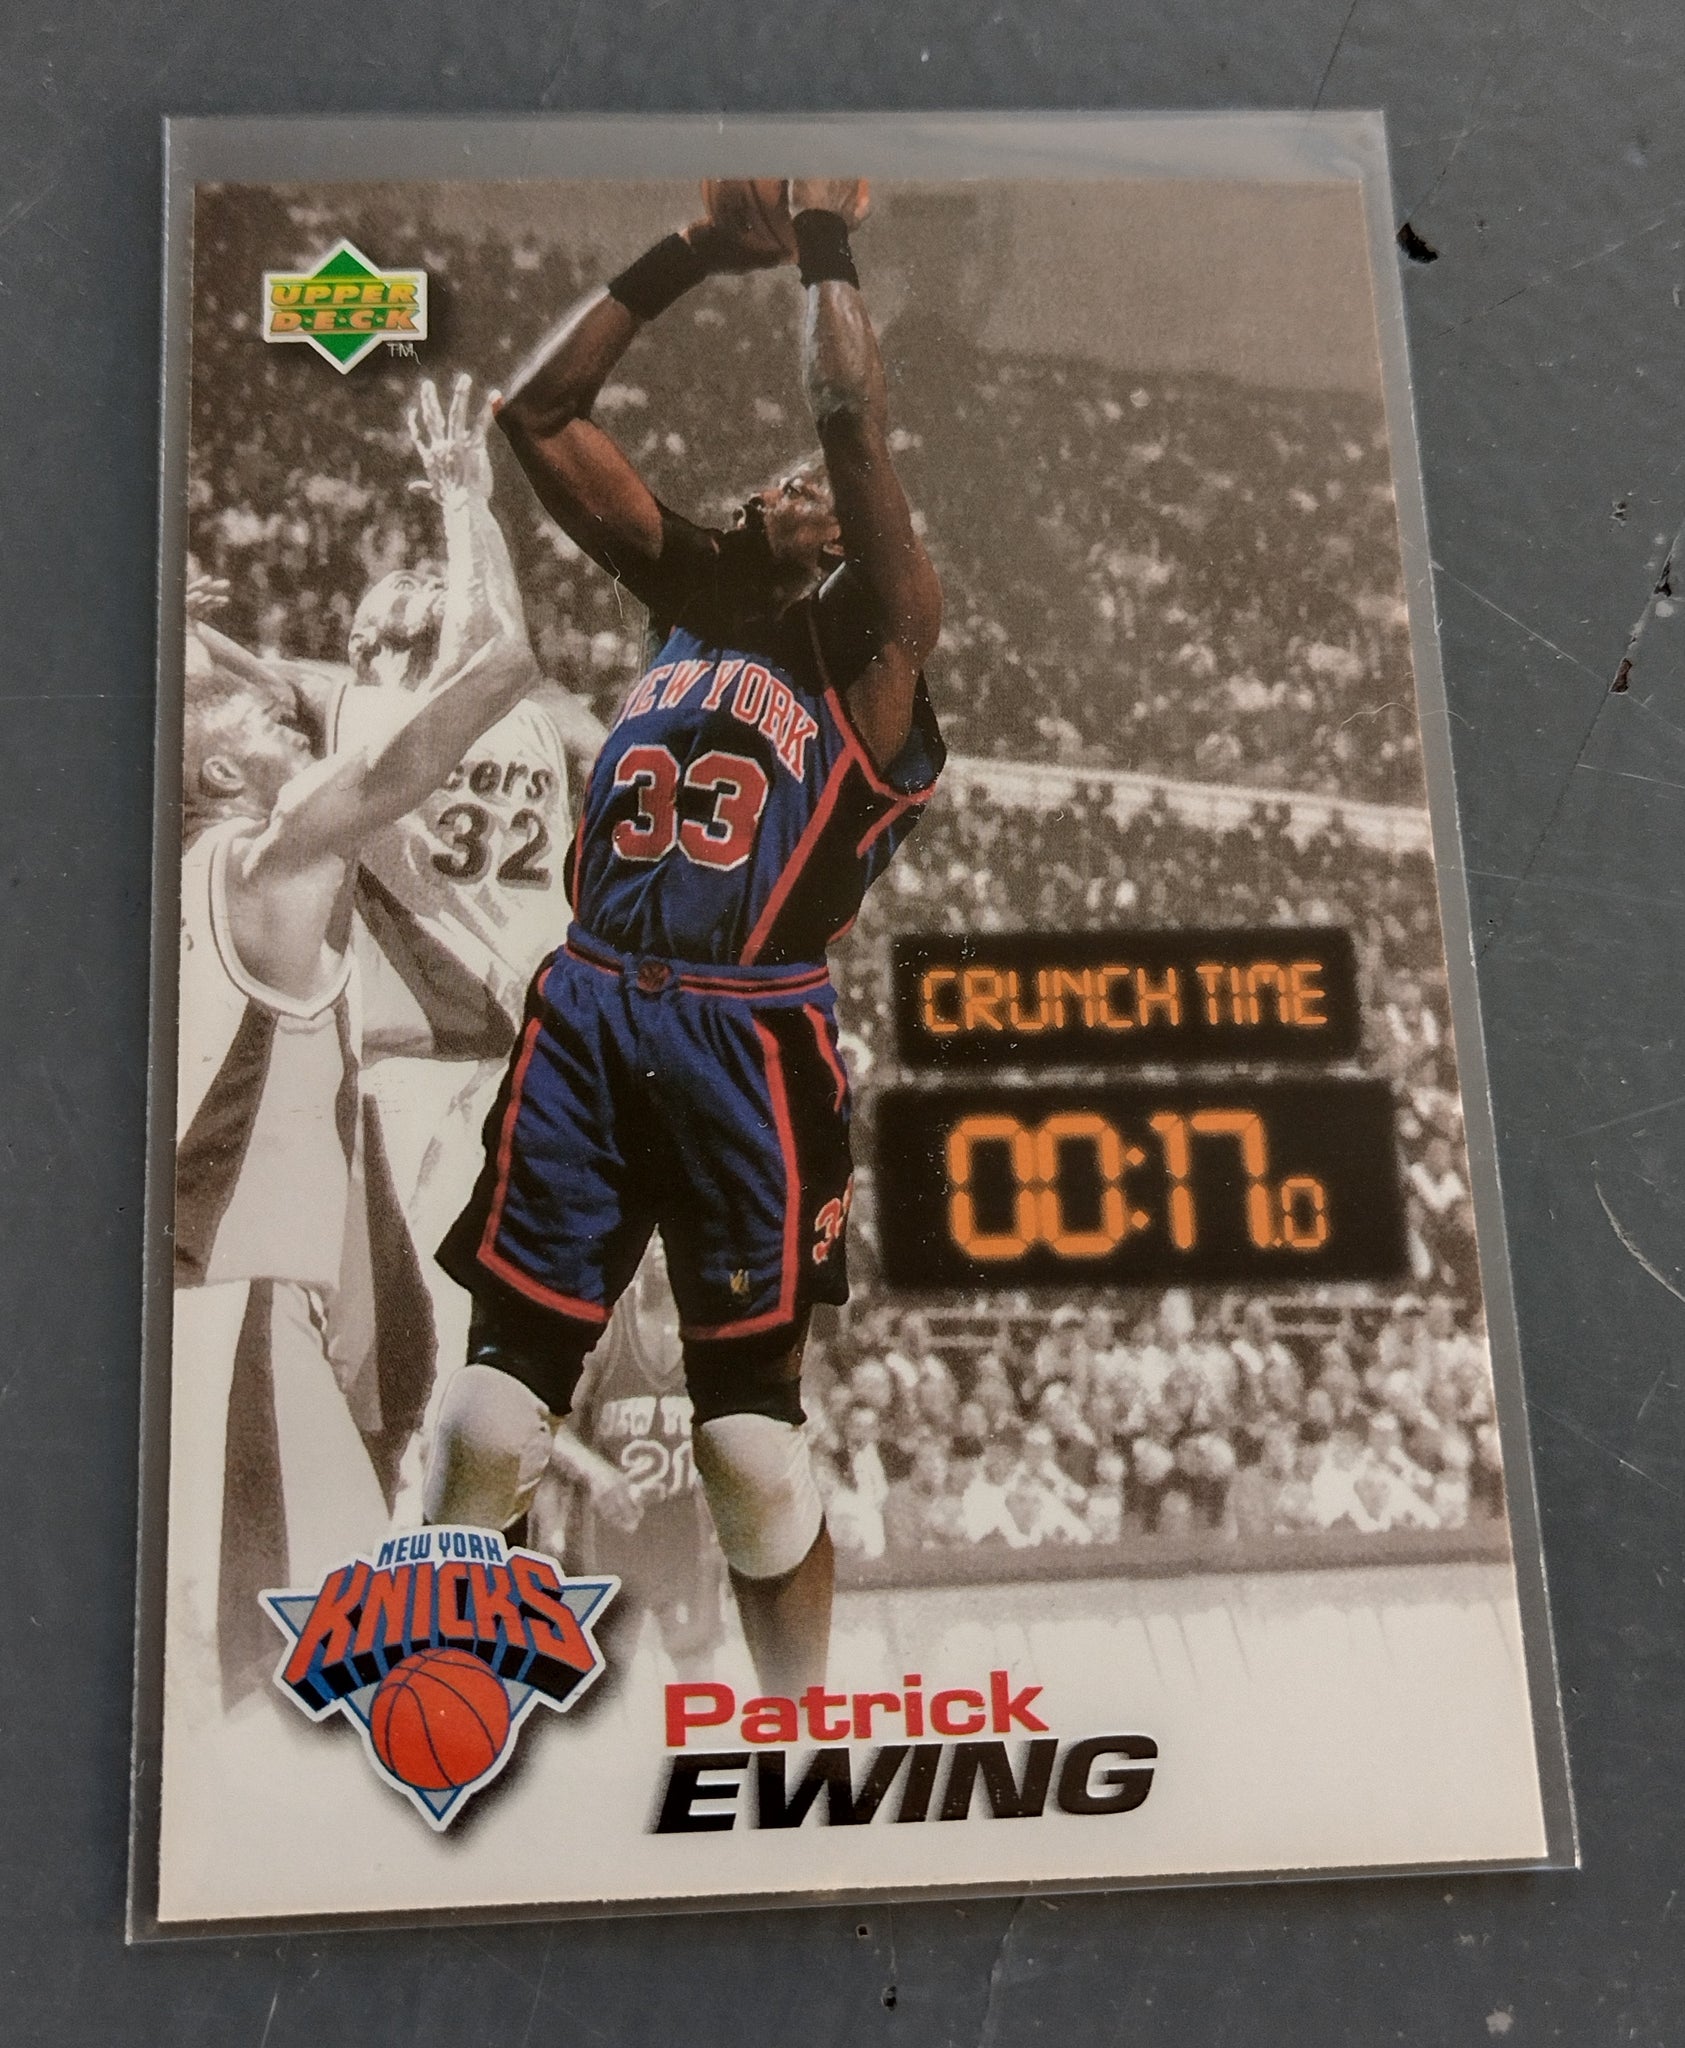 1997 Upper Deck Crunch Time Patrick Ewing #21 Trading Card